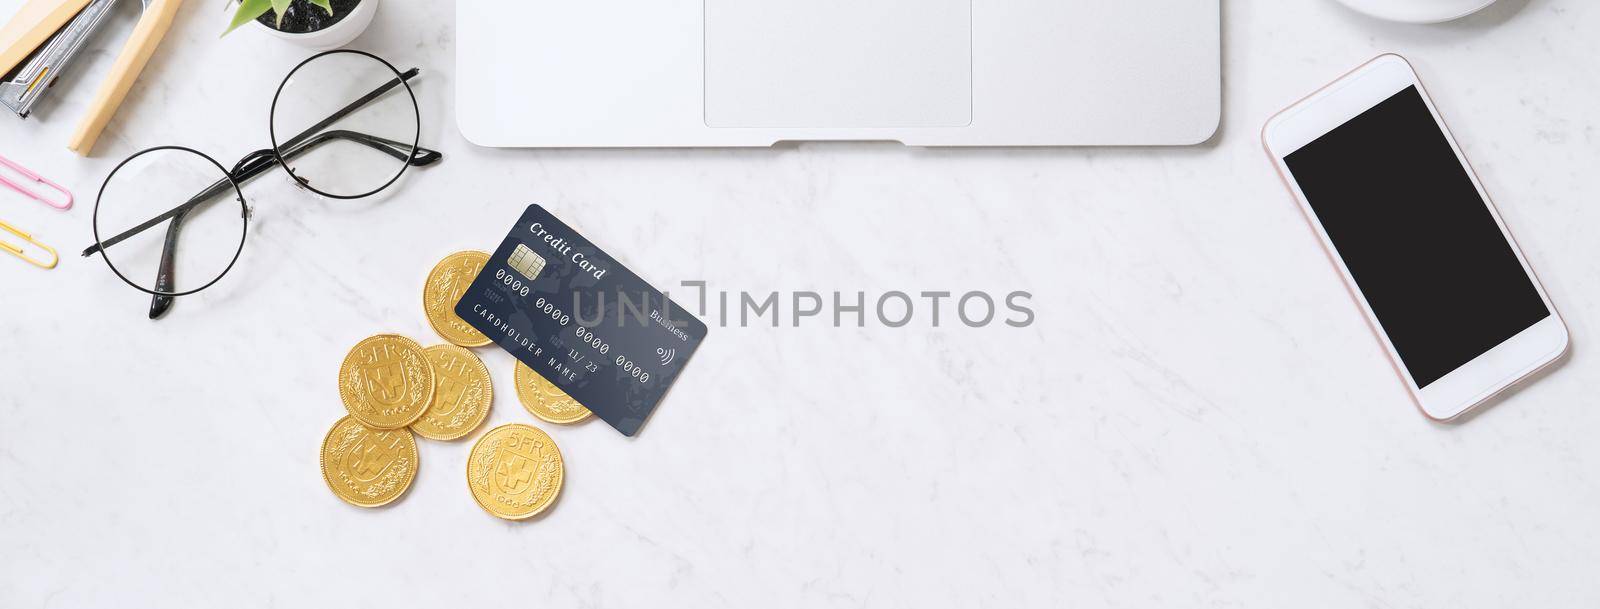 Concept of online payment with credit card with smart phone, laptop computer on office desk on clean bright marble table background, top view, flat lay